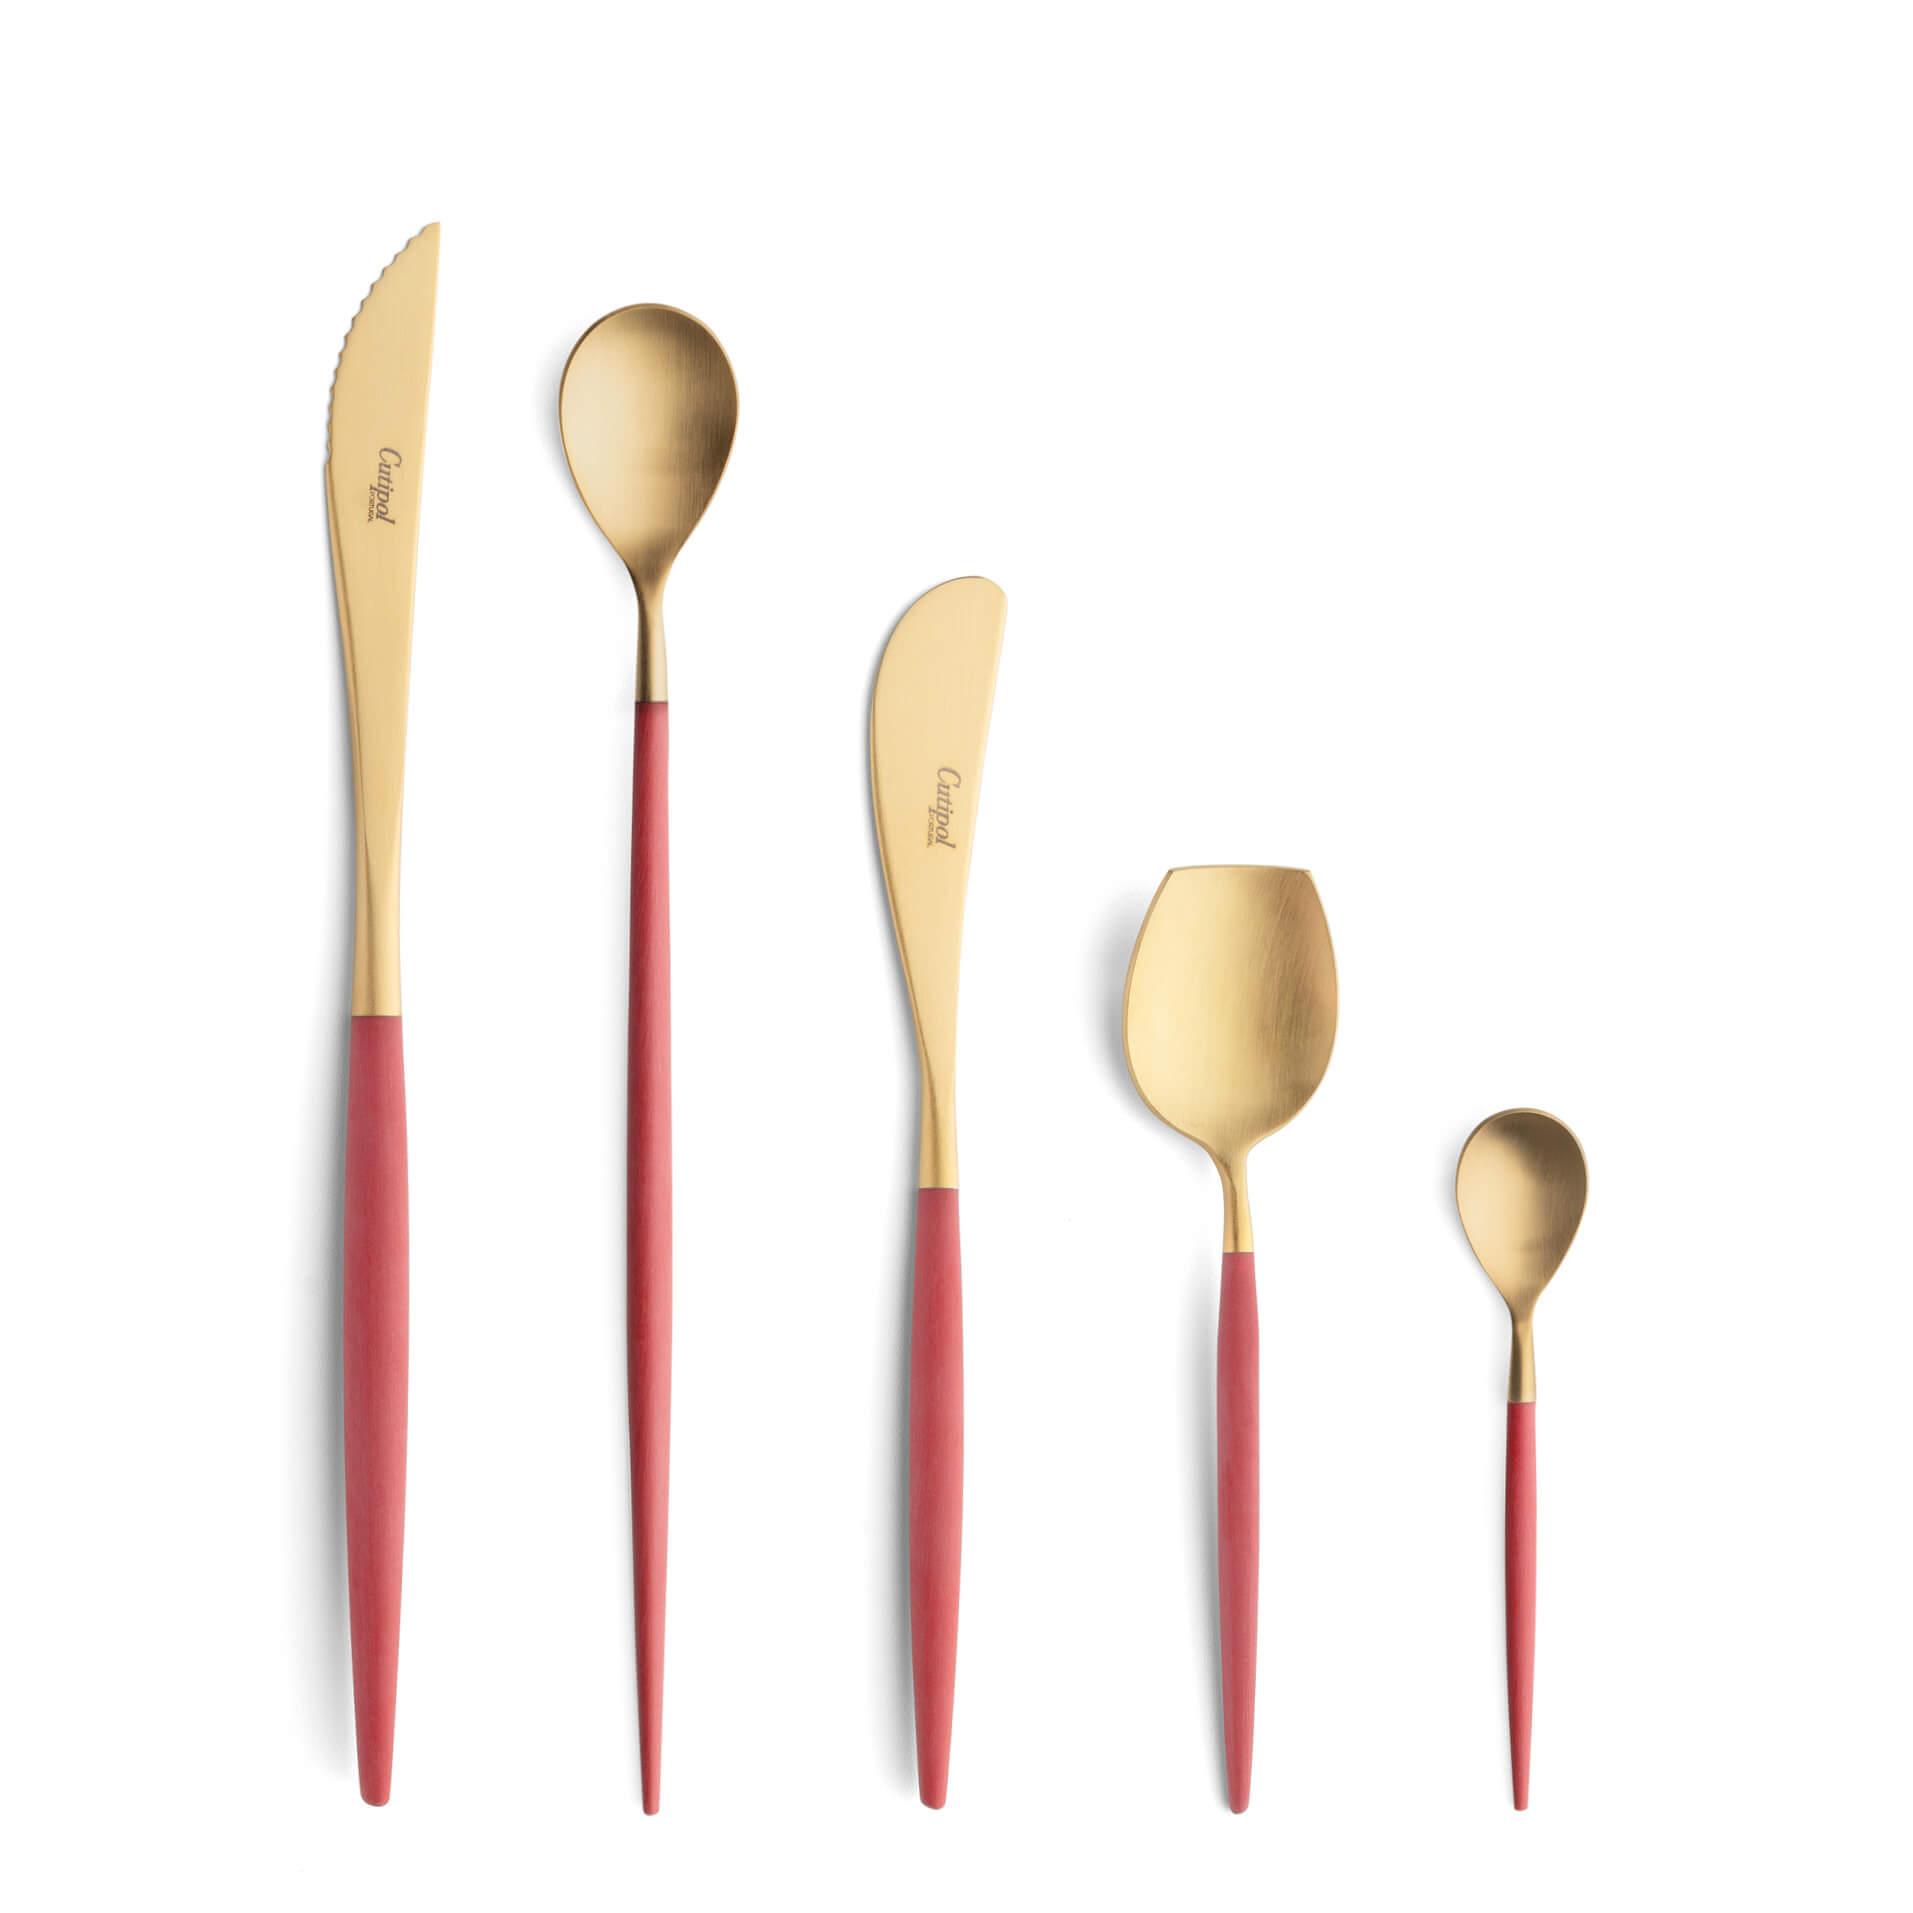 Cutipol Cutlery Mio Red Gold with steak knife, long drink spoon, butter knife, sugar spoon and moka spoon